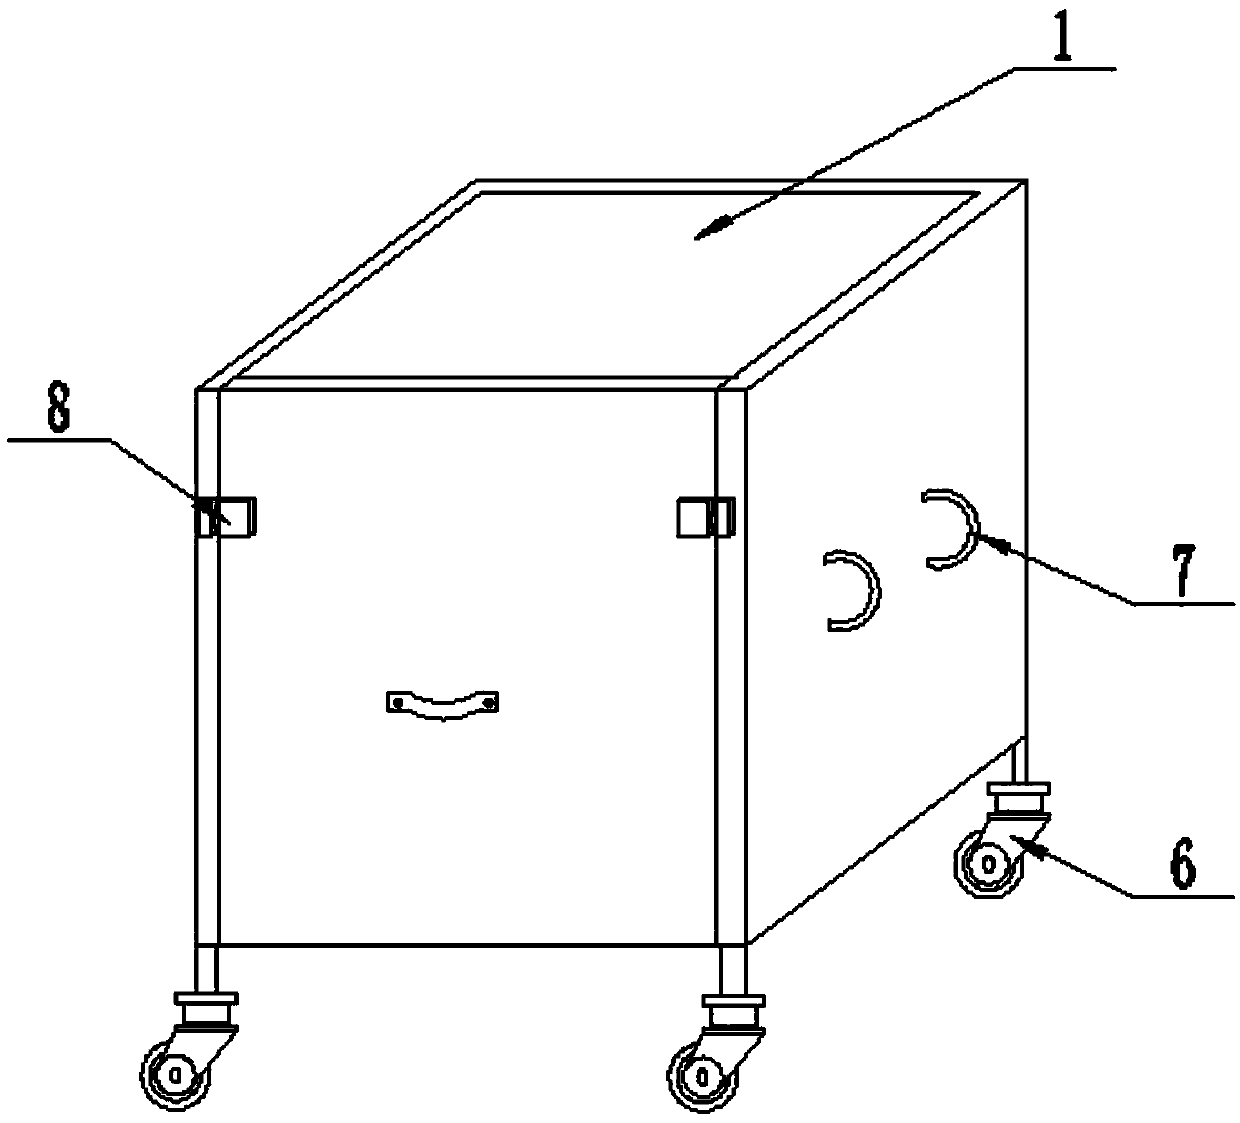 Multifunctional storage box with cellular board structure and used for storing copper tubes vertically